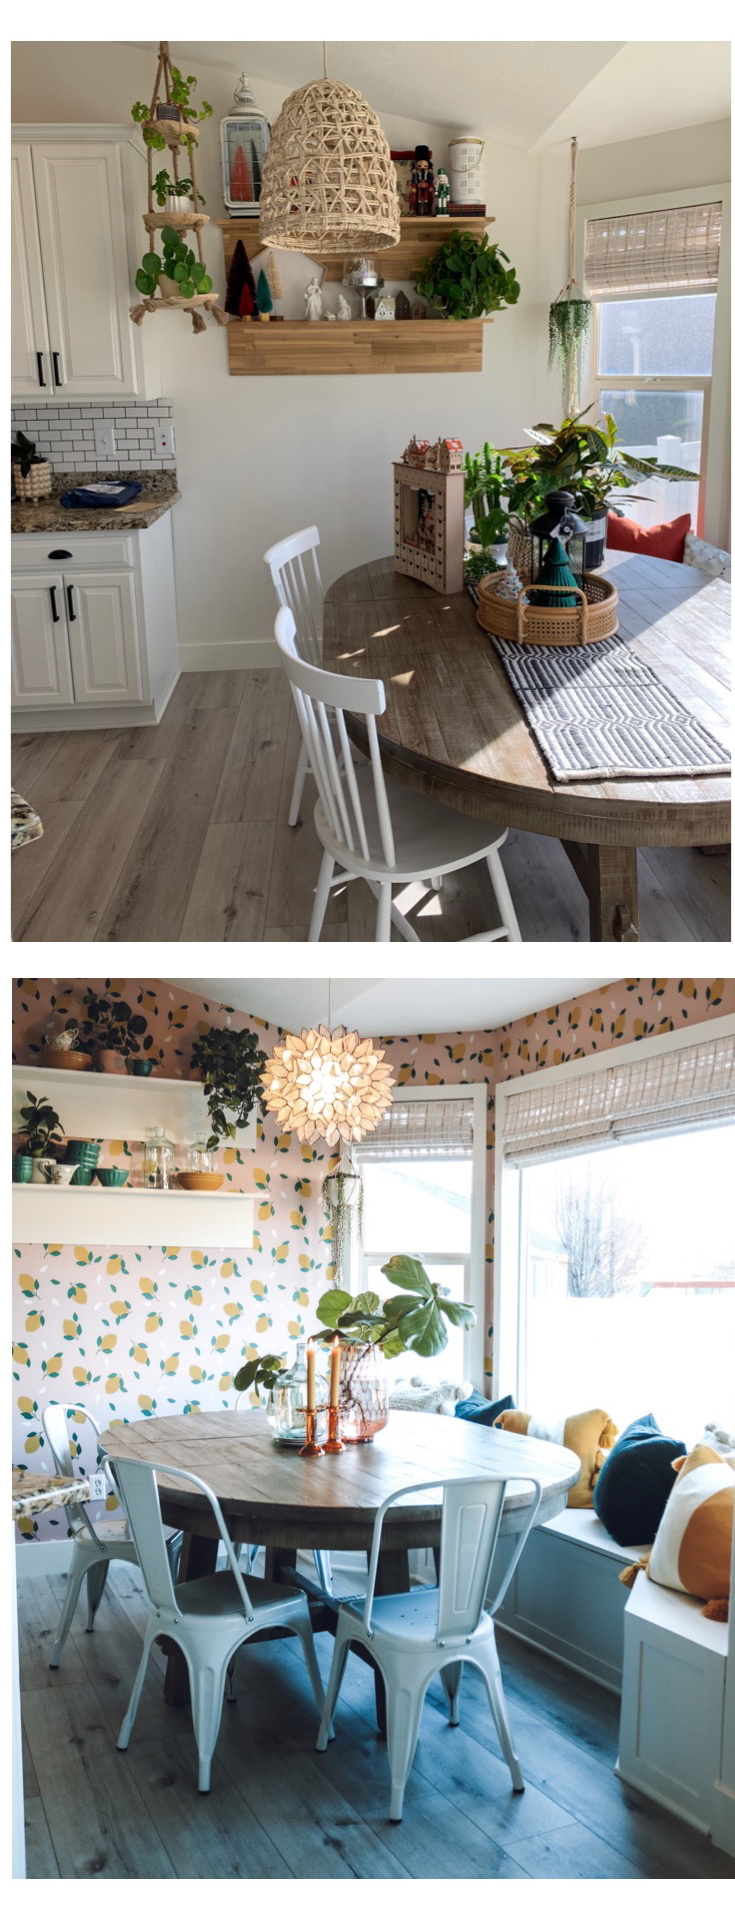 Making of a Kitchen with Removable Wallpaper